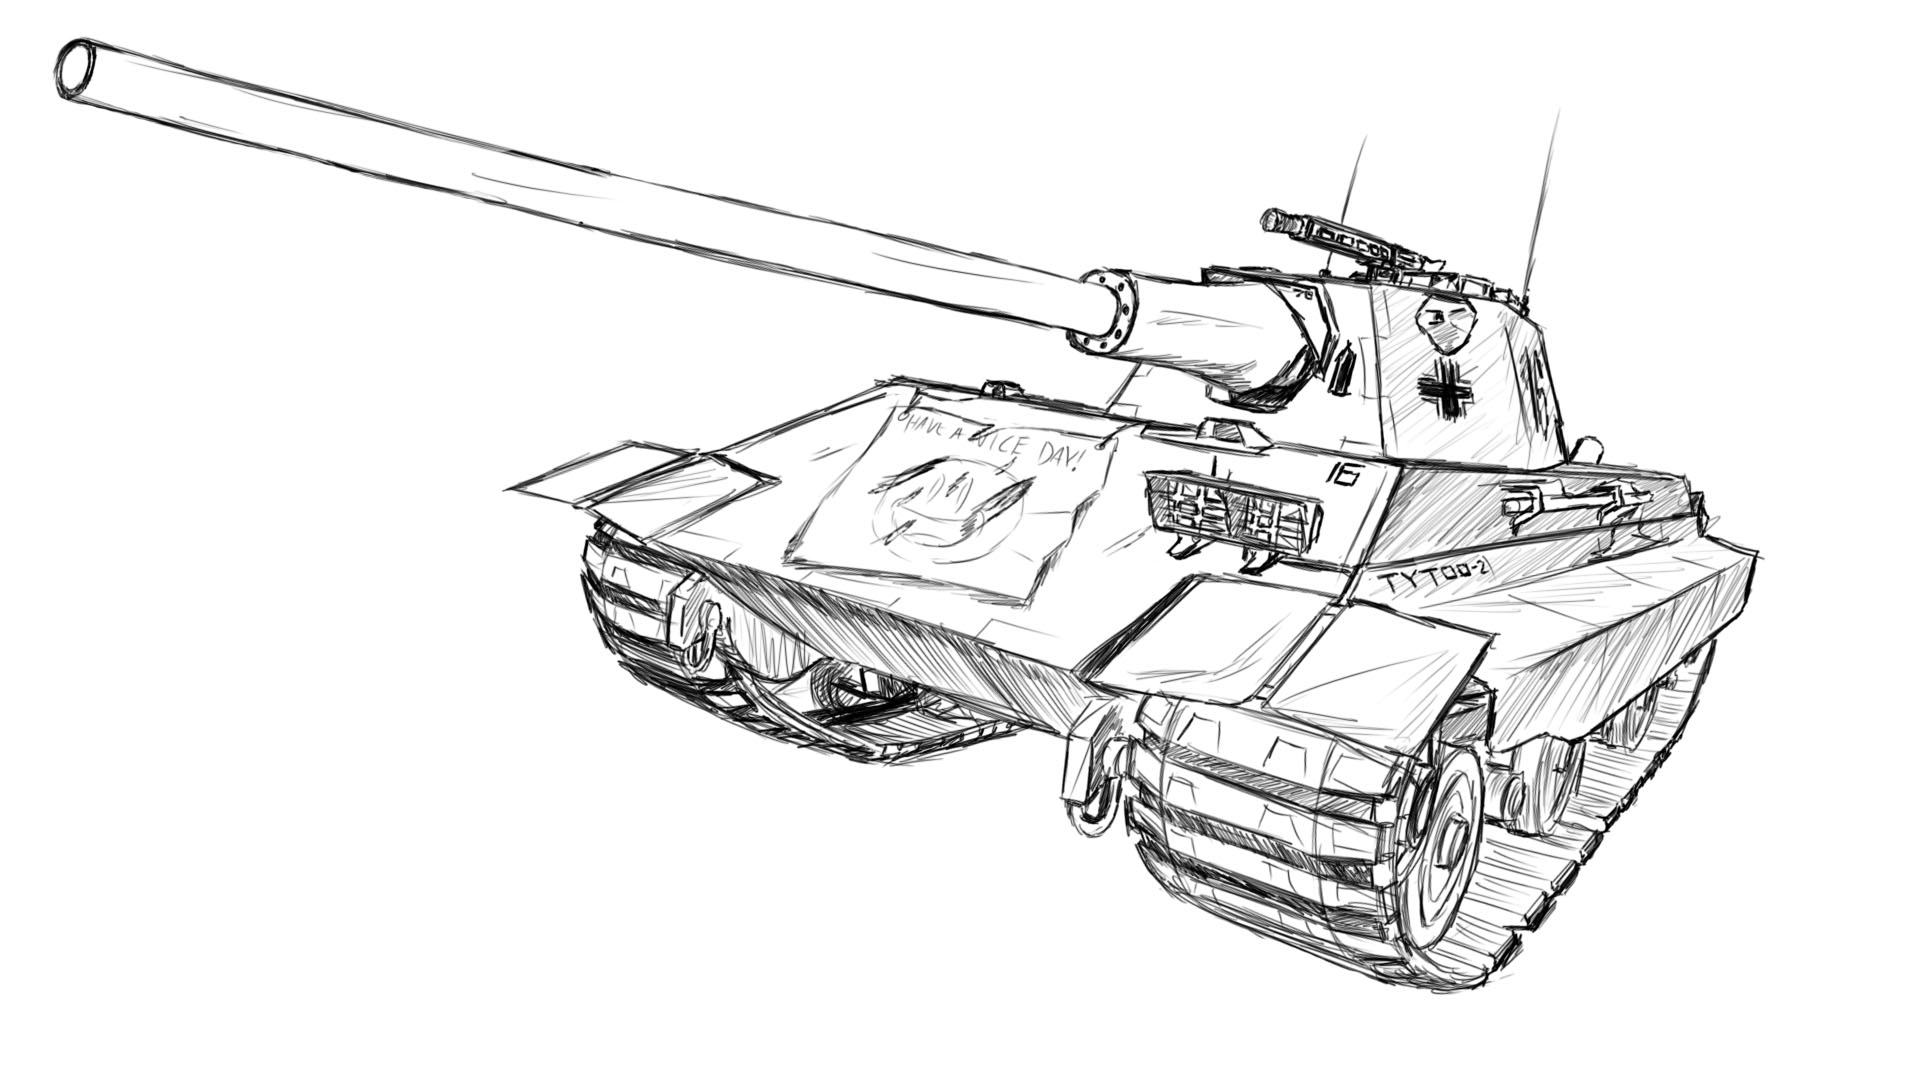 draw a military tank online